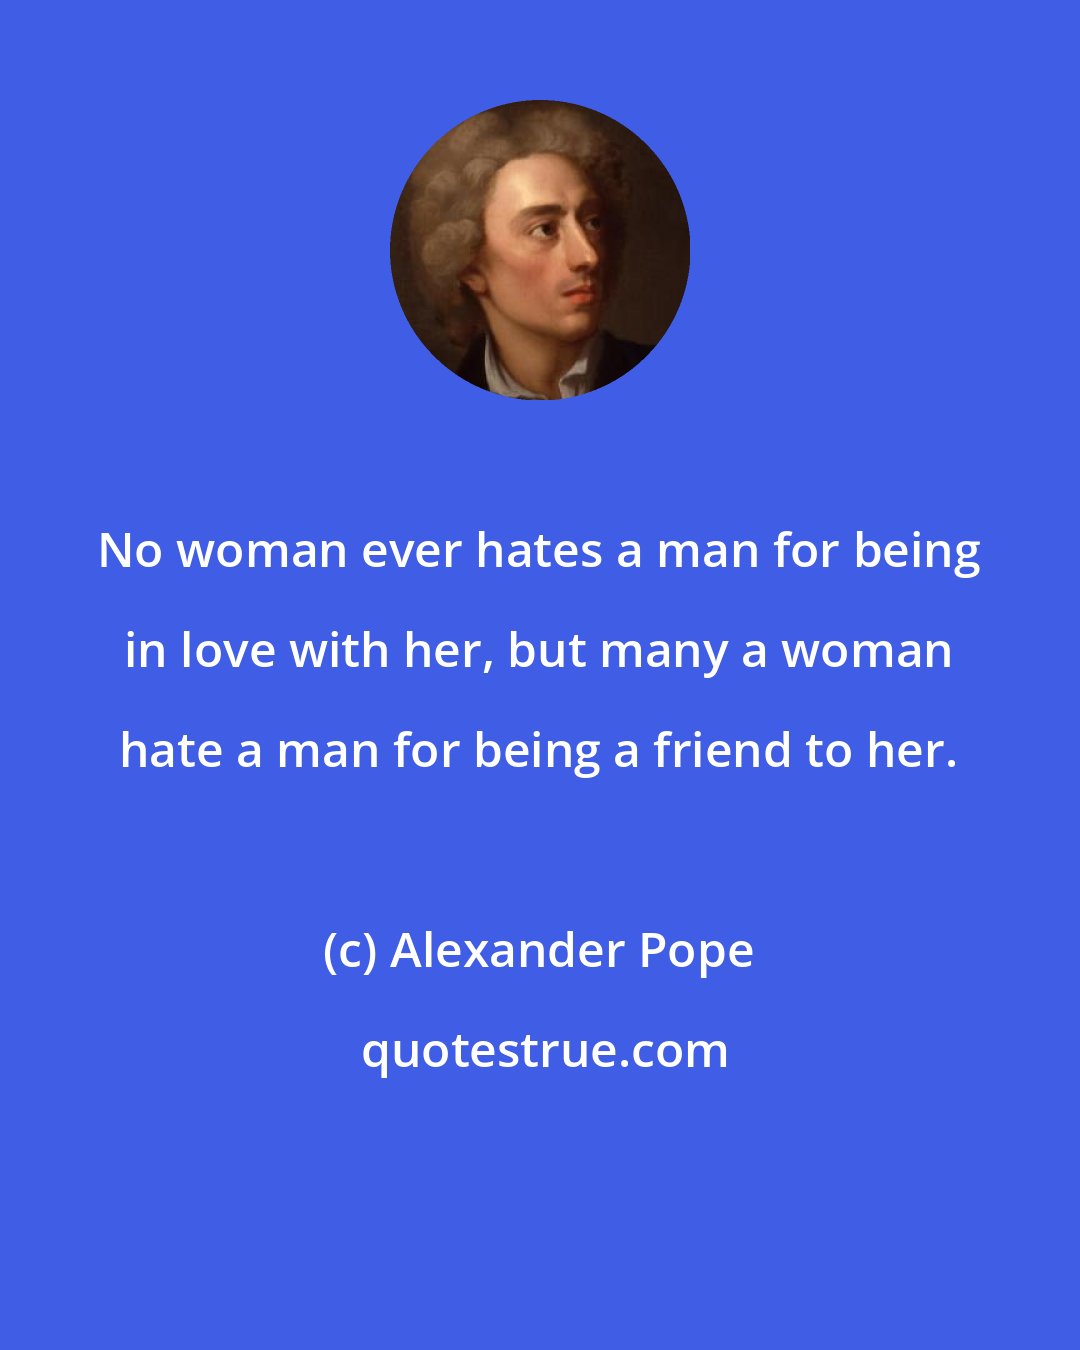 Alexander Pope: No woman ever hates a man for being in love with her, but many a woman hate a man for being a friend to her.